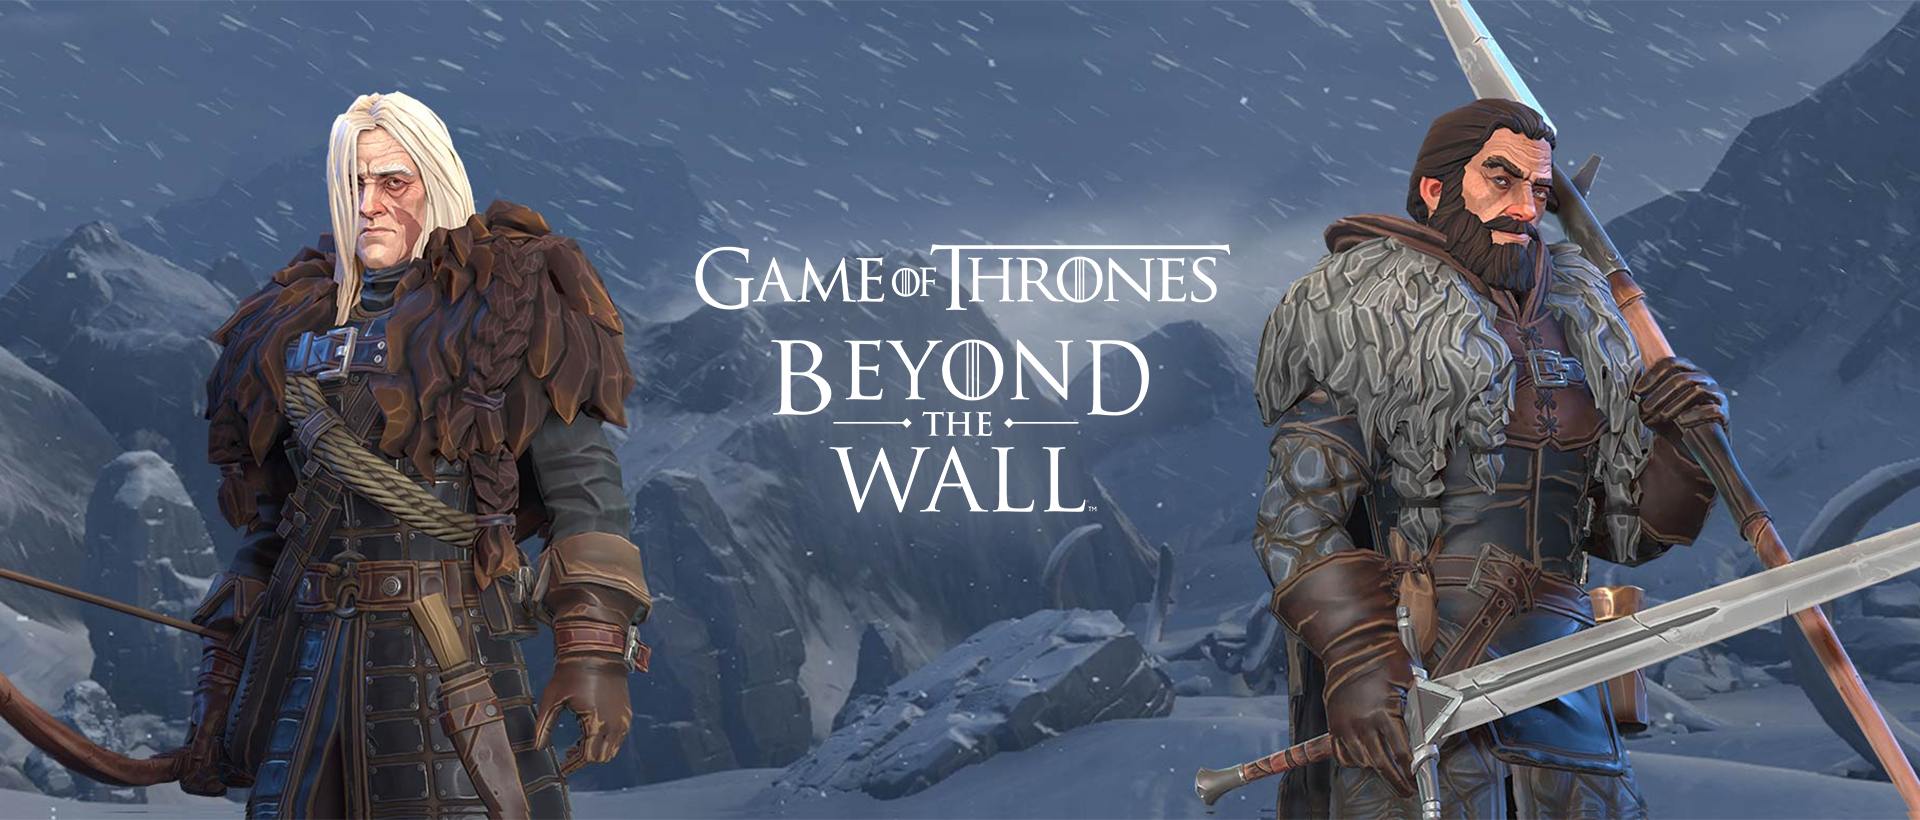 game of thrones beyond the wall ign